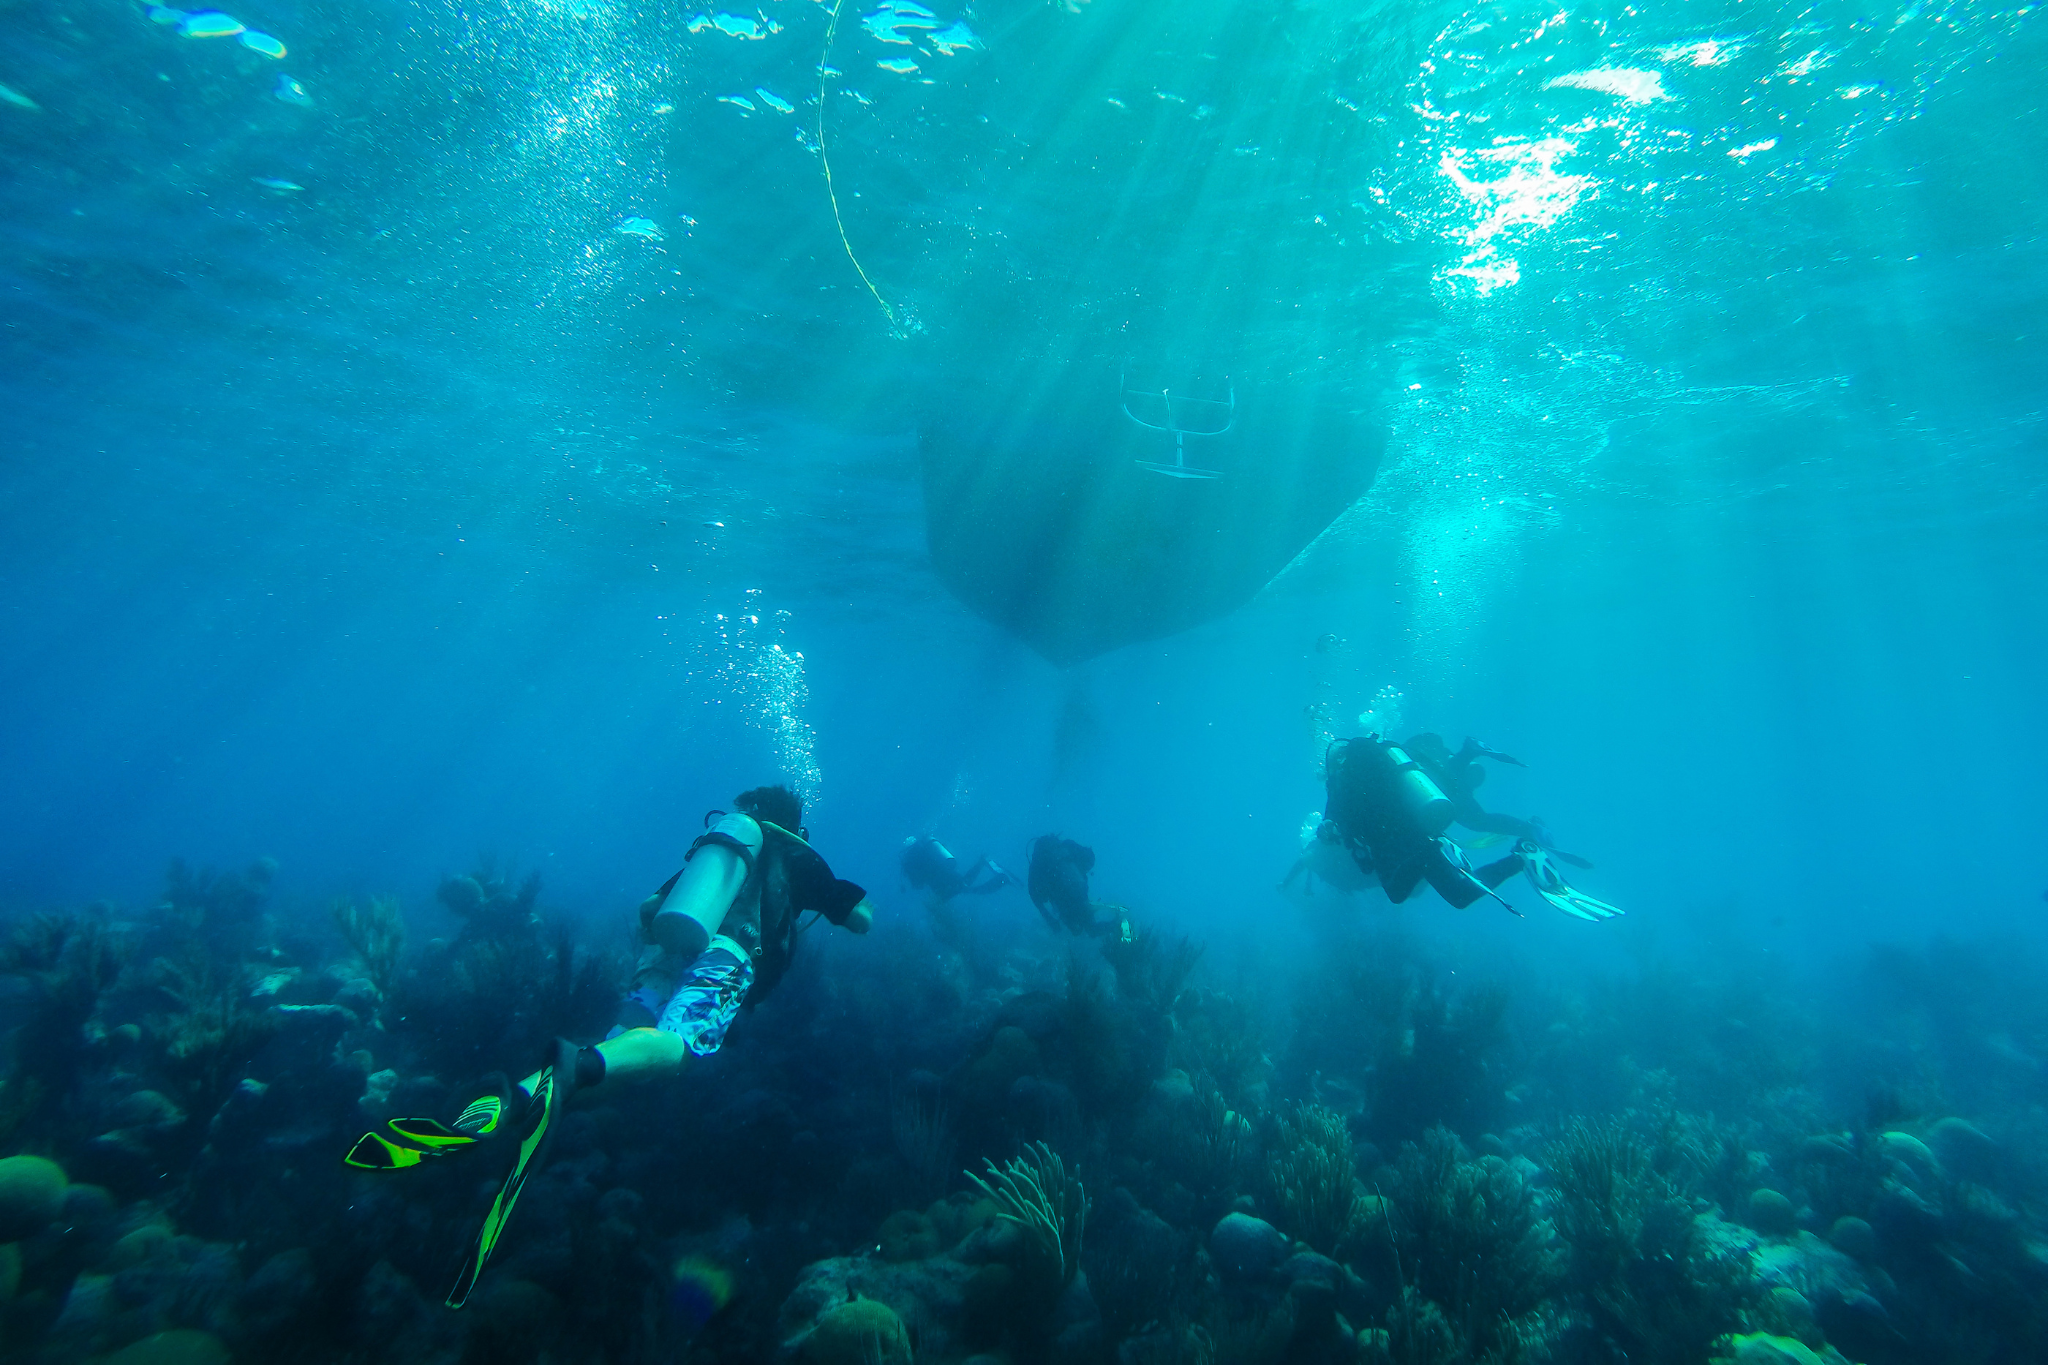 Underwater image of divers doing a reef dive